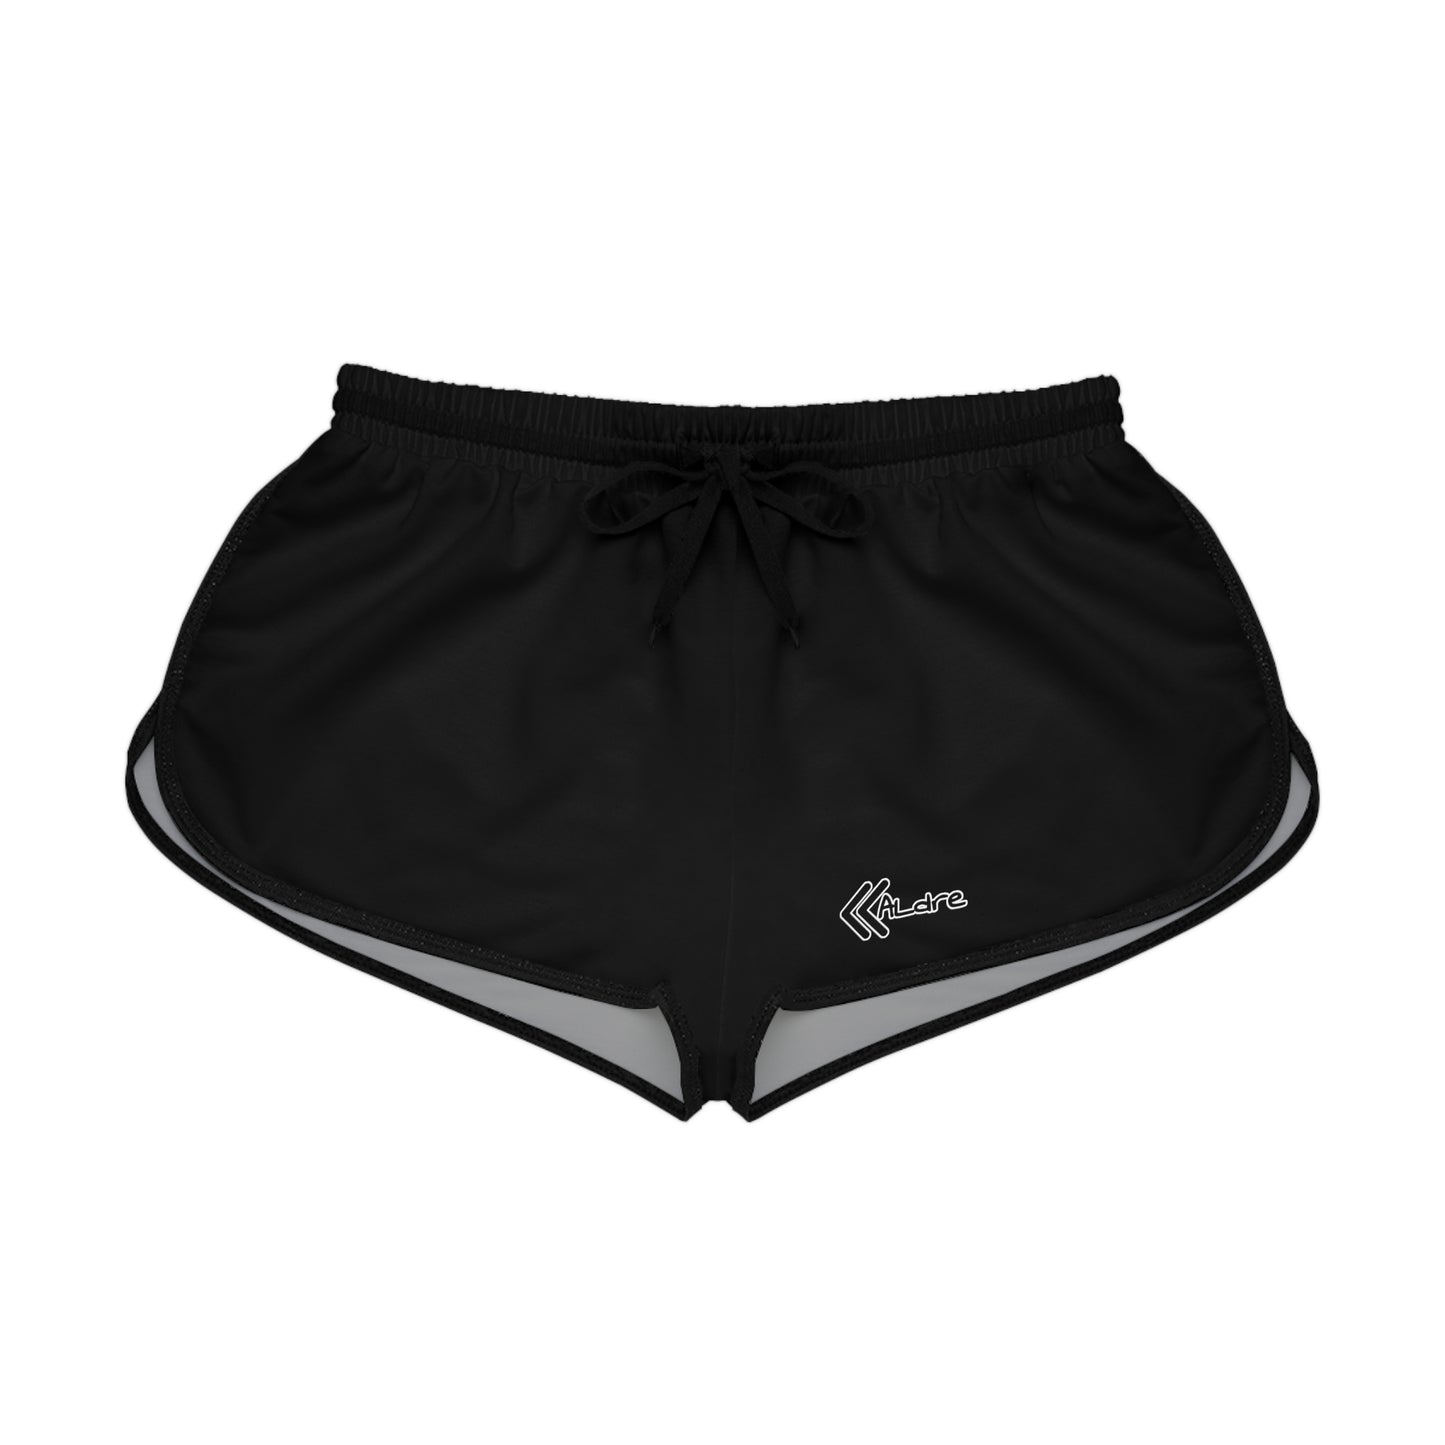 Women's Relaxed Shorts